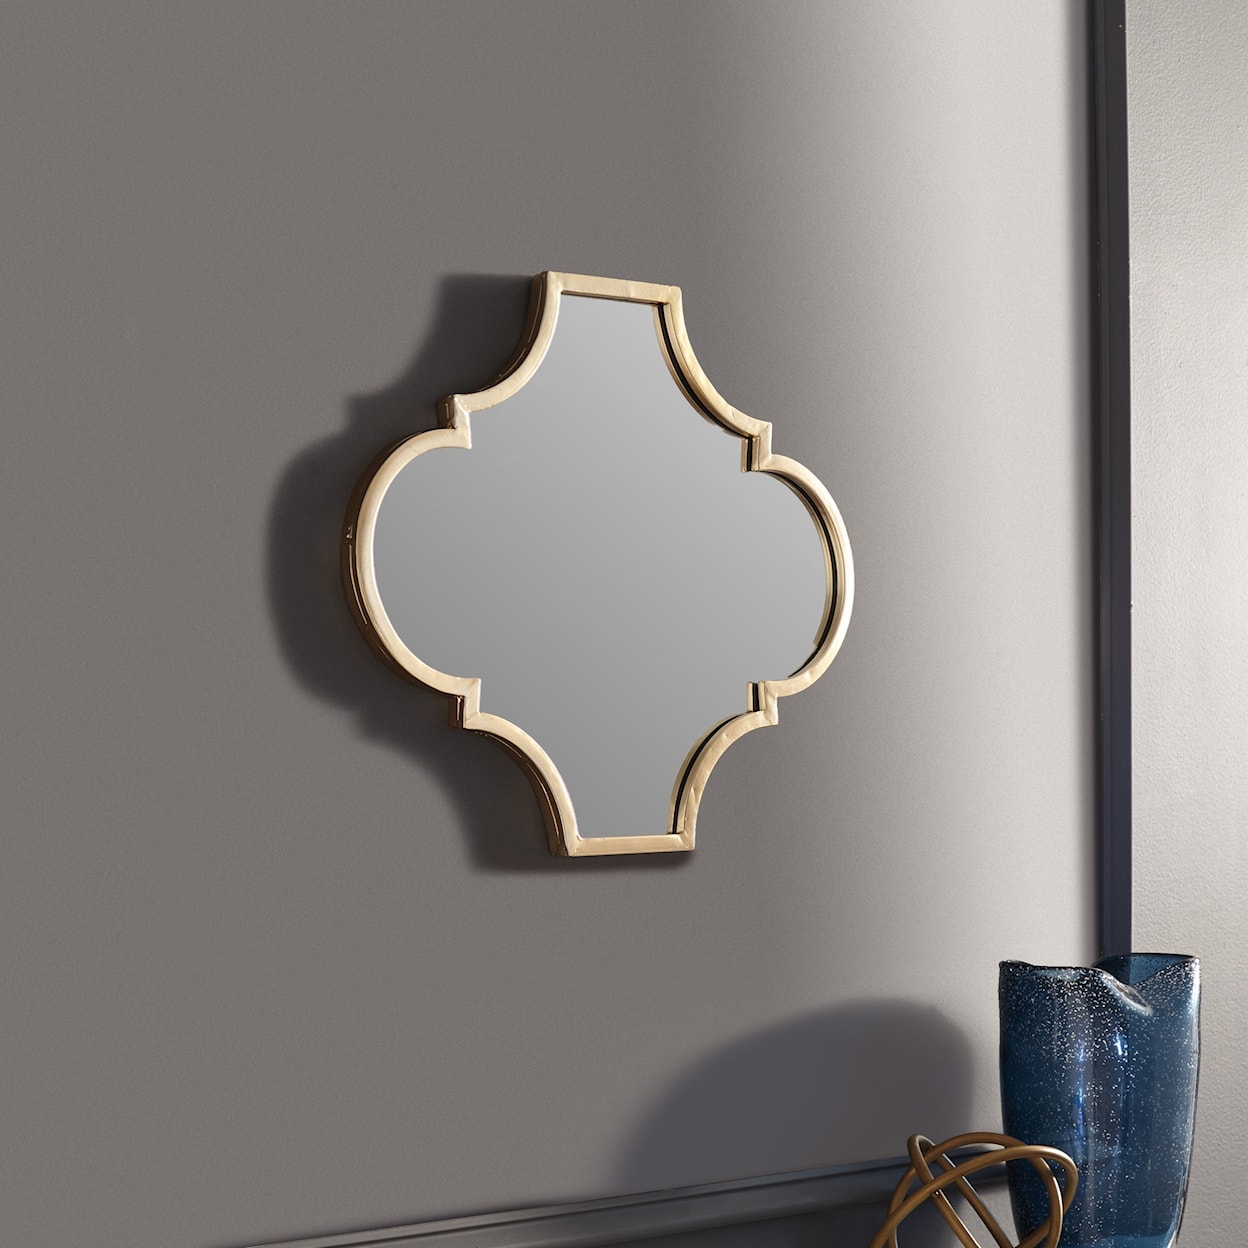 Michael Alan Select Accent Mirrors Callie Gold Finish Accent Mirror